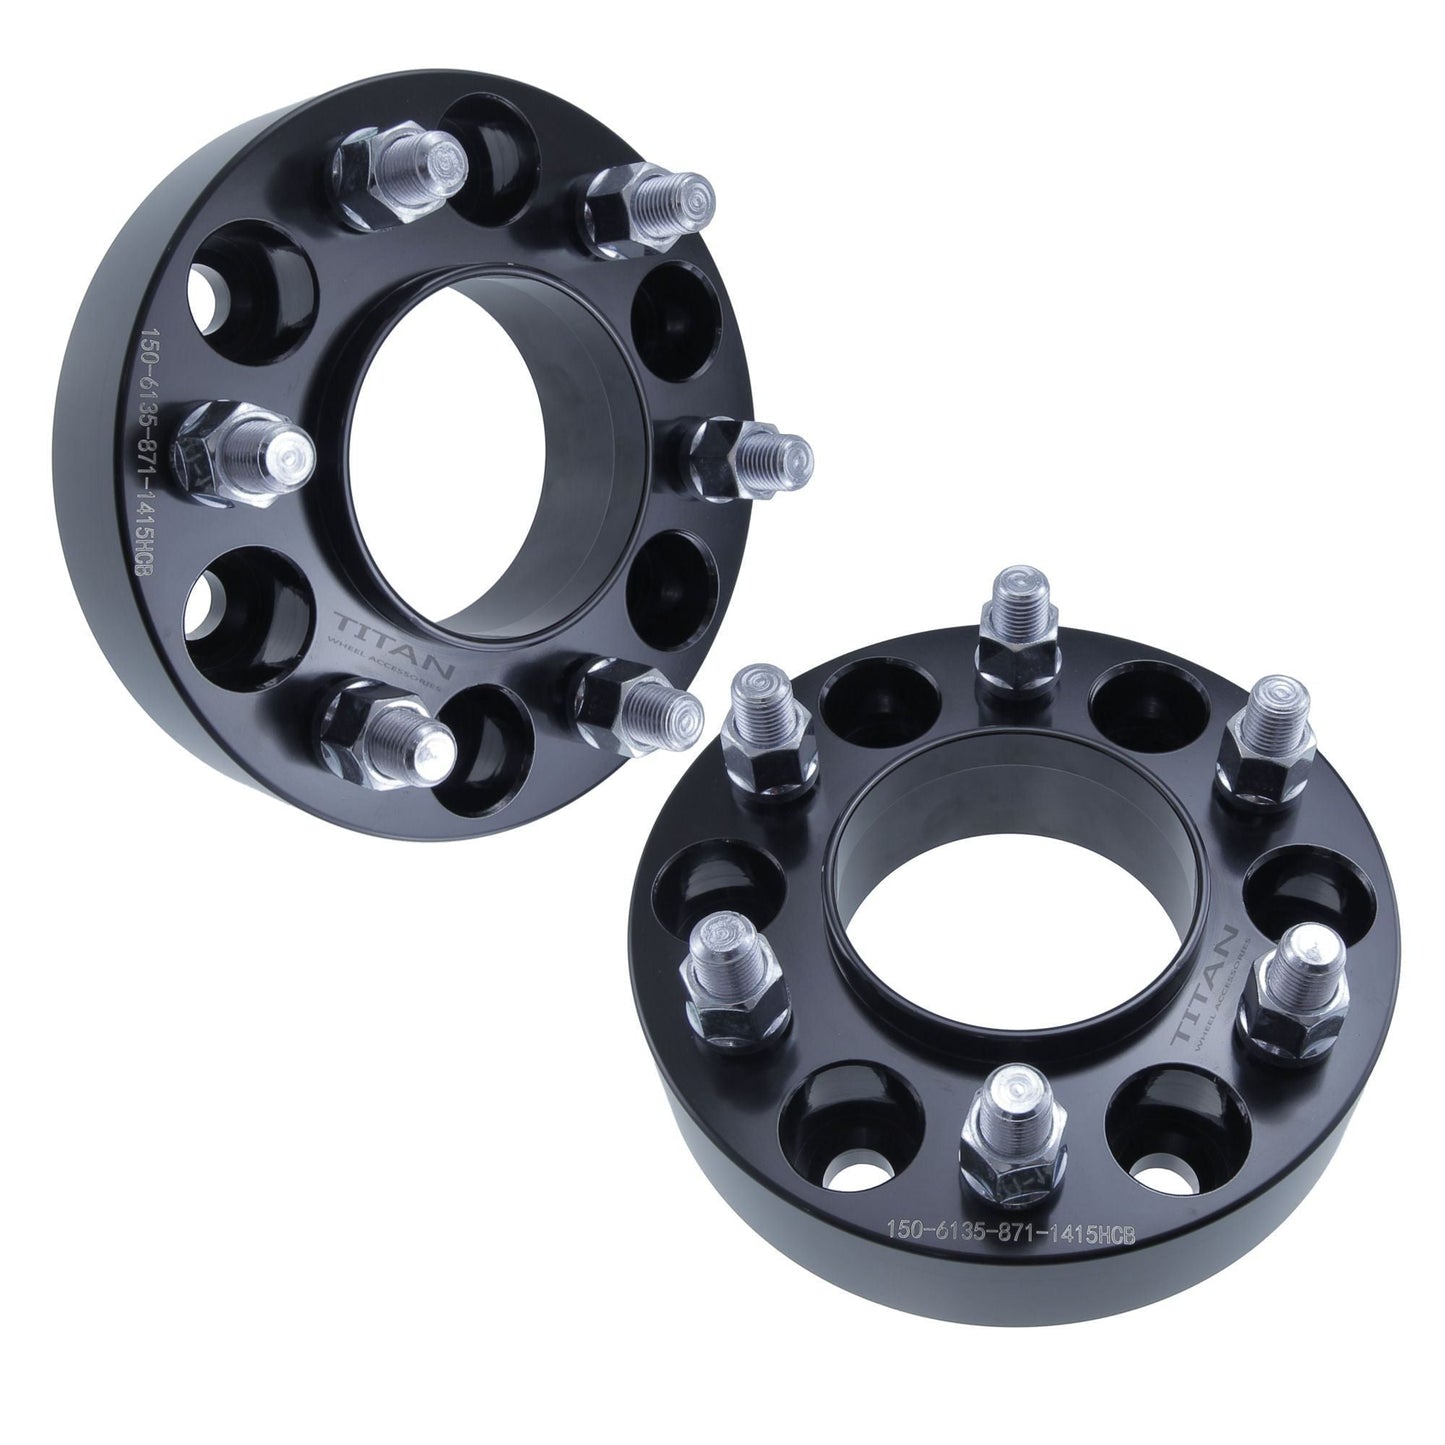 1.5" (38mm) Titan Wheel Spacers for Ford F150 Expedition Lincoln Navigator | 6x135 | 87.1 Hubcentric |14x2 Studs |  Set of 4 | Titan Wheel Accessories